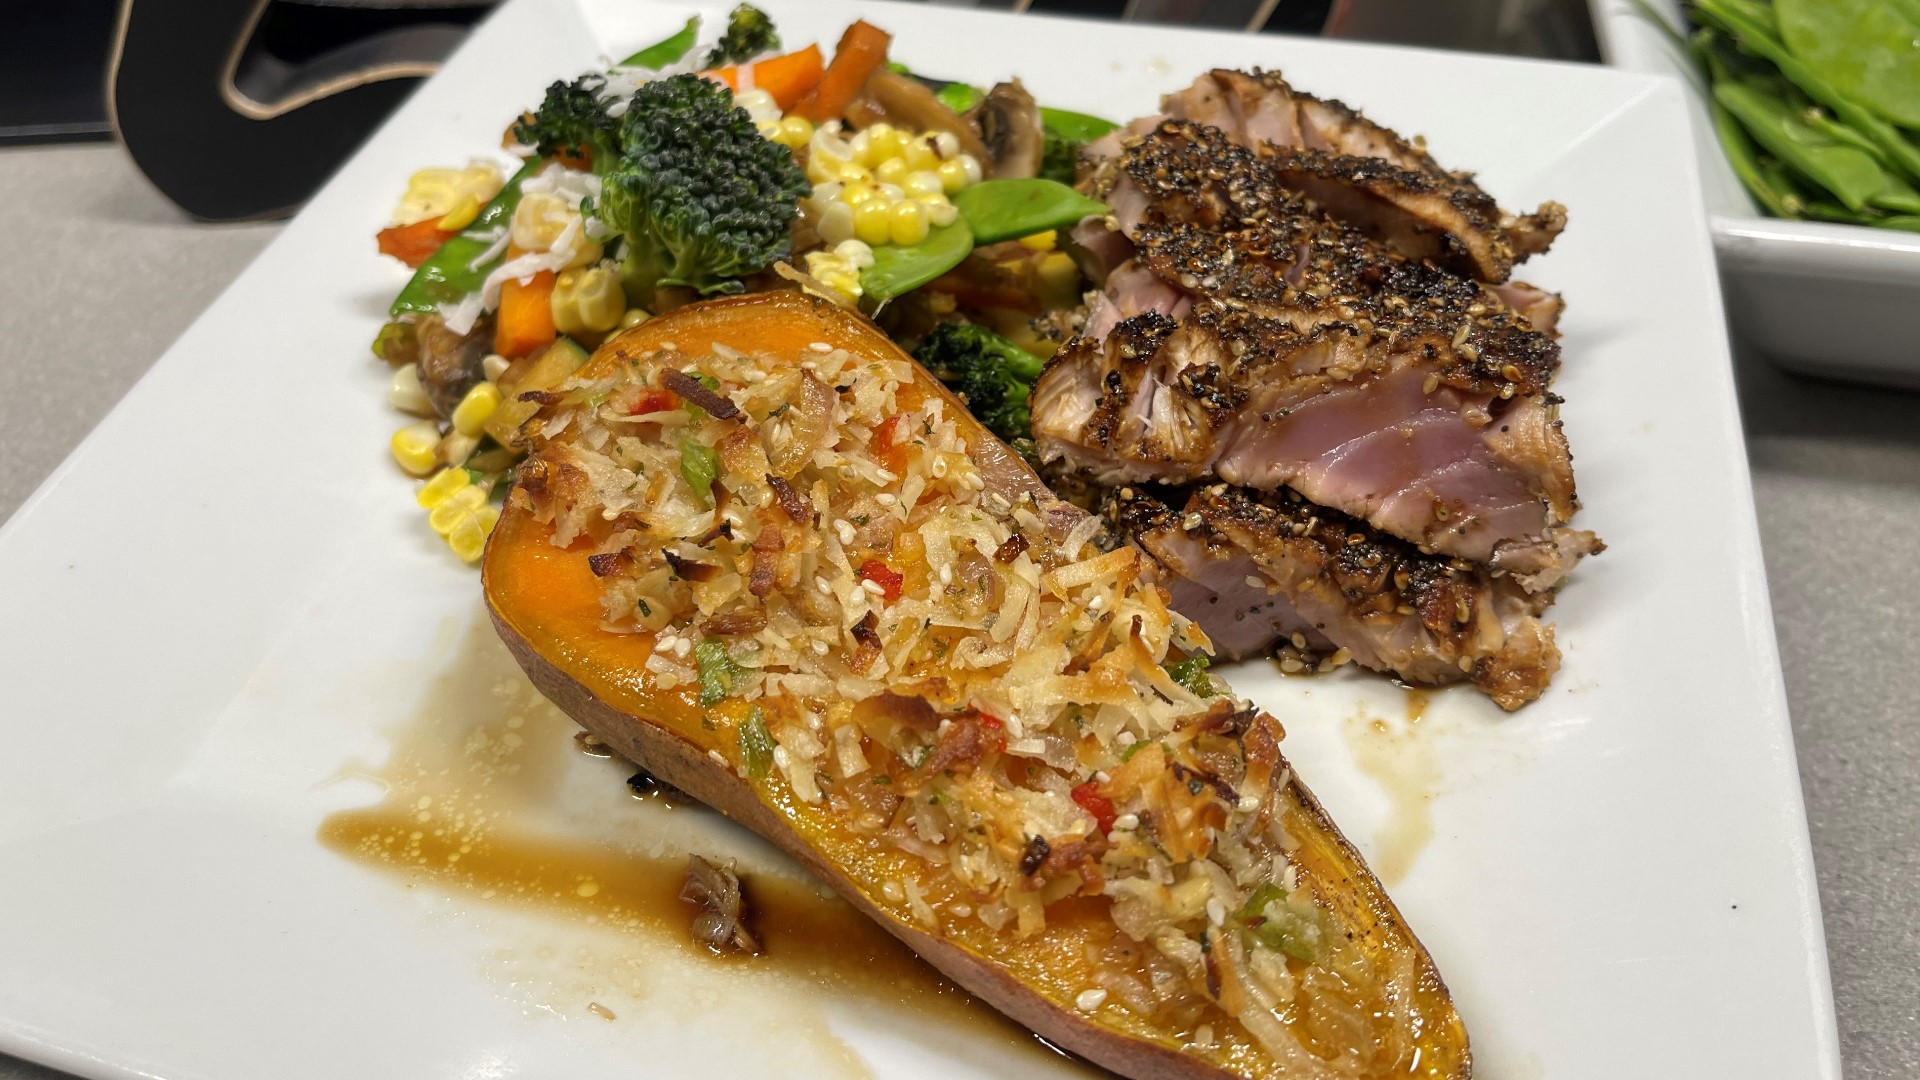 Olivia's sesame seared tuna with roasted sweet potatoes is a light, summery meal that is best enjoyed sitting out on the patio with a citrus peach margarita in hand.